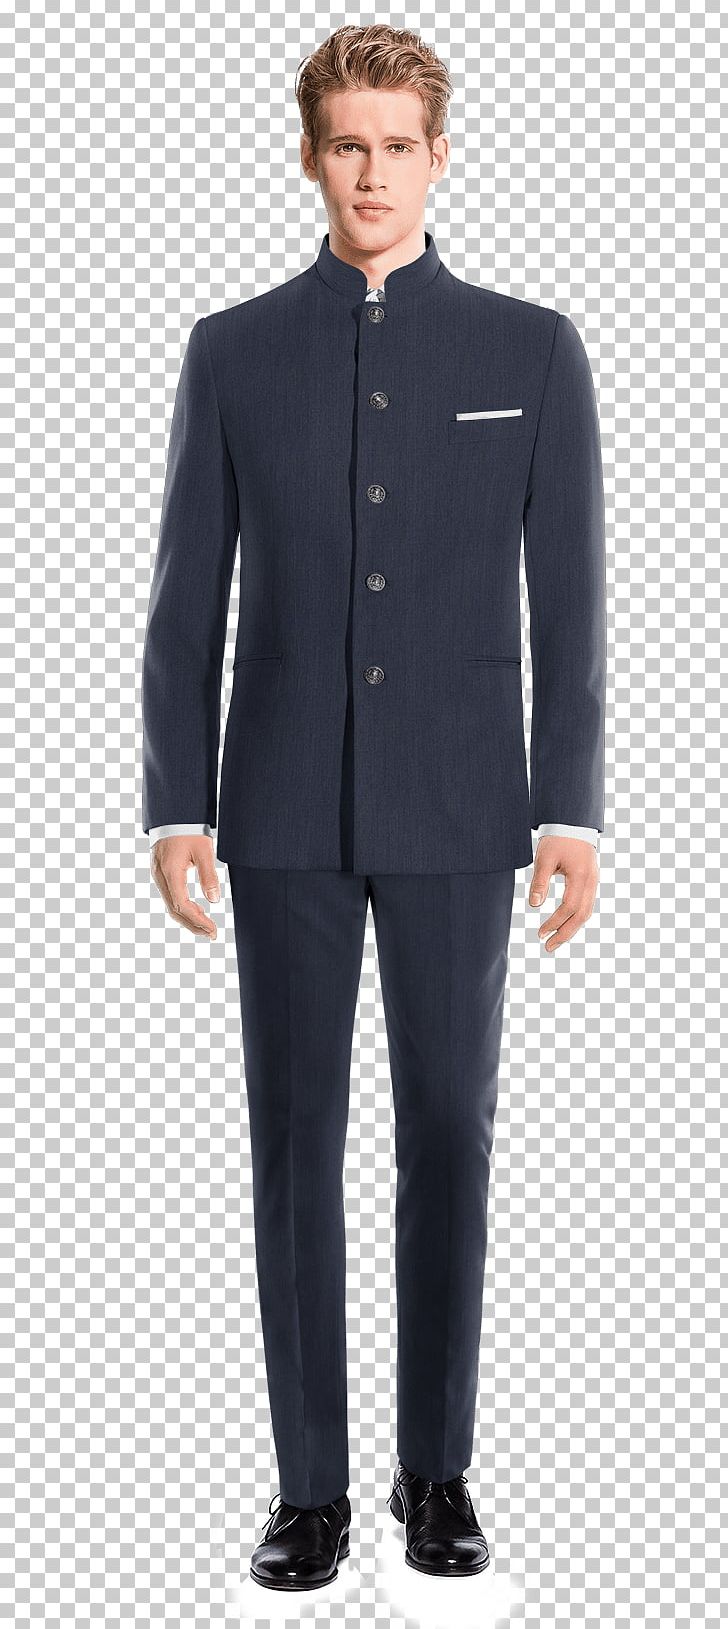 Suit Tuxedo Clothing Marks & Spencer Formal Wear PNG, Clipart, Bespoke Tailoring, Blazer, Businessperson, Clothing, Coat Free PNG Download